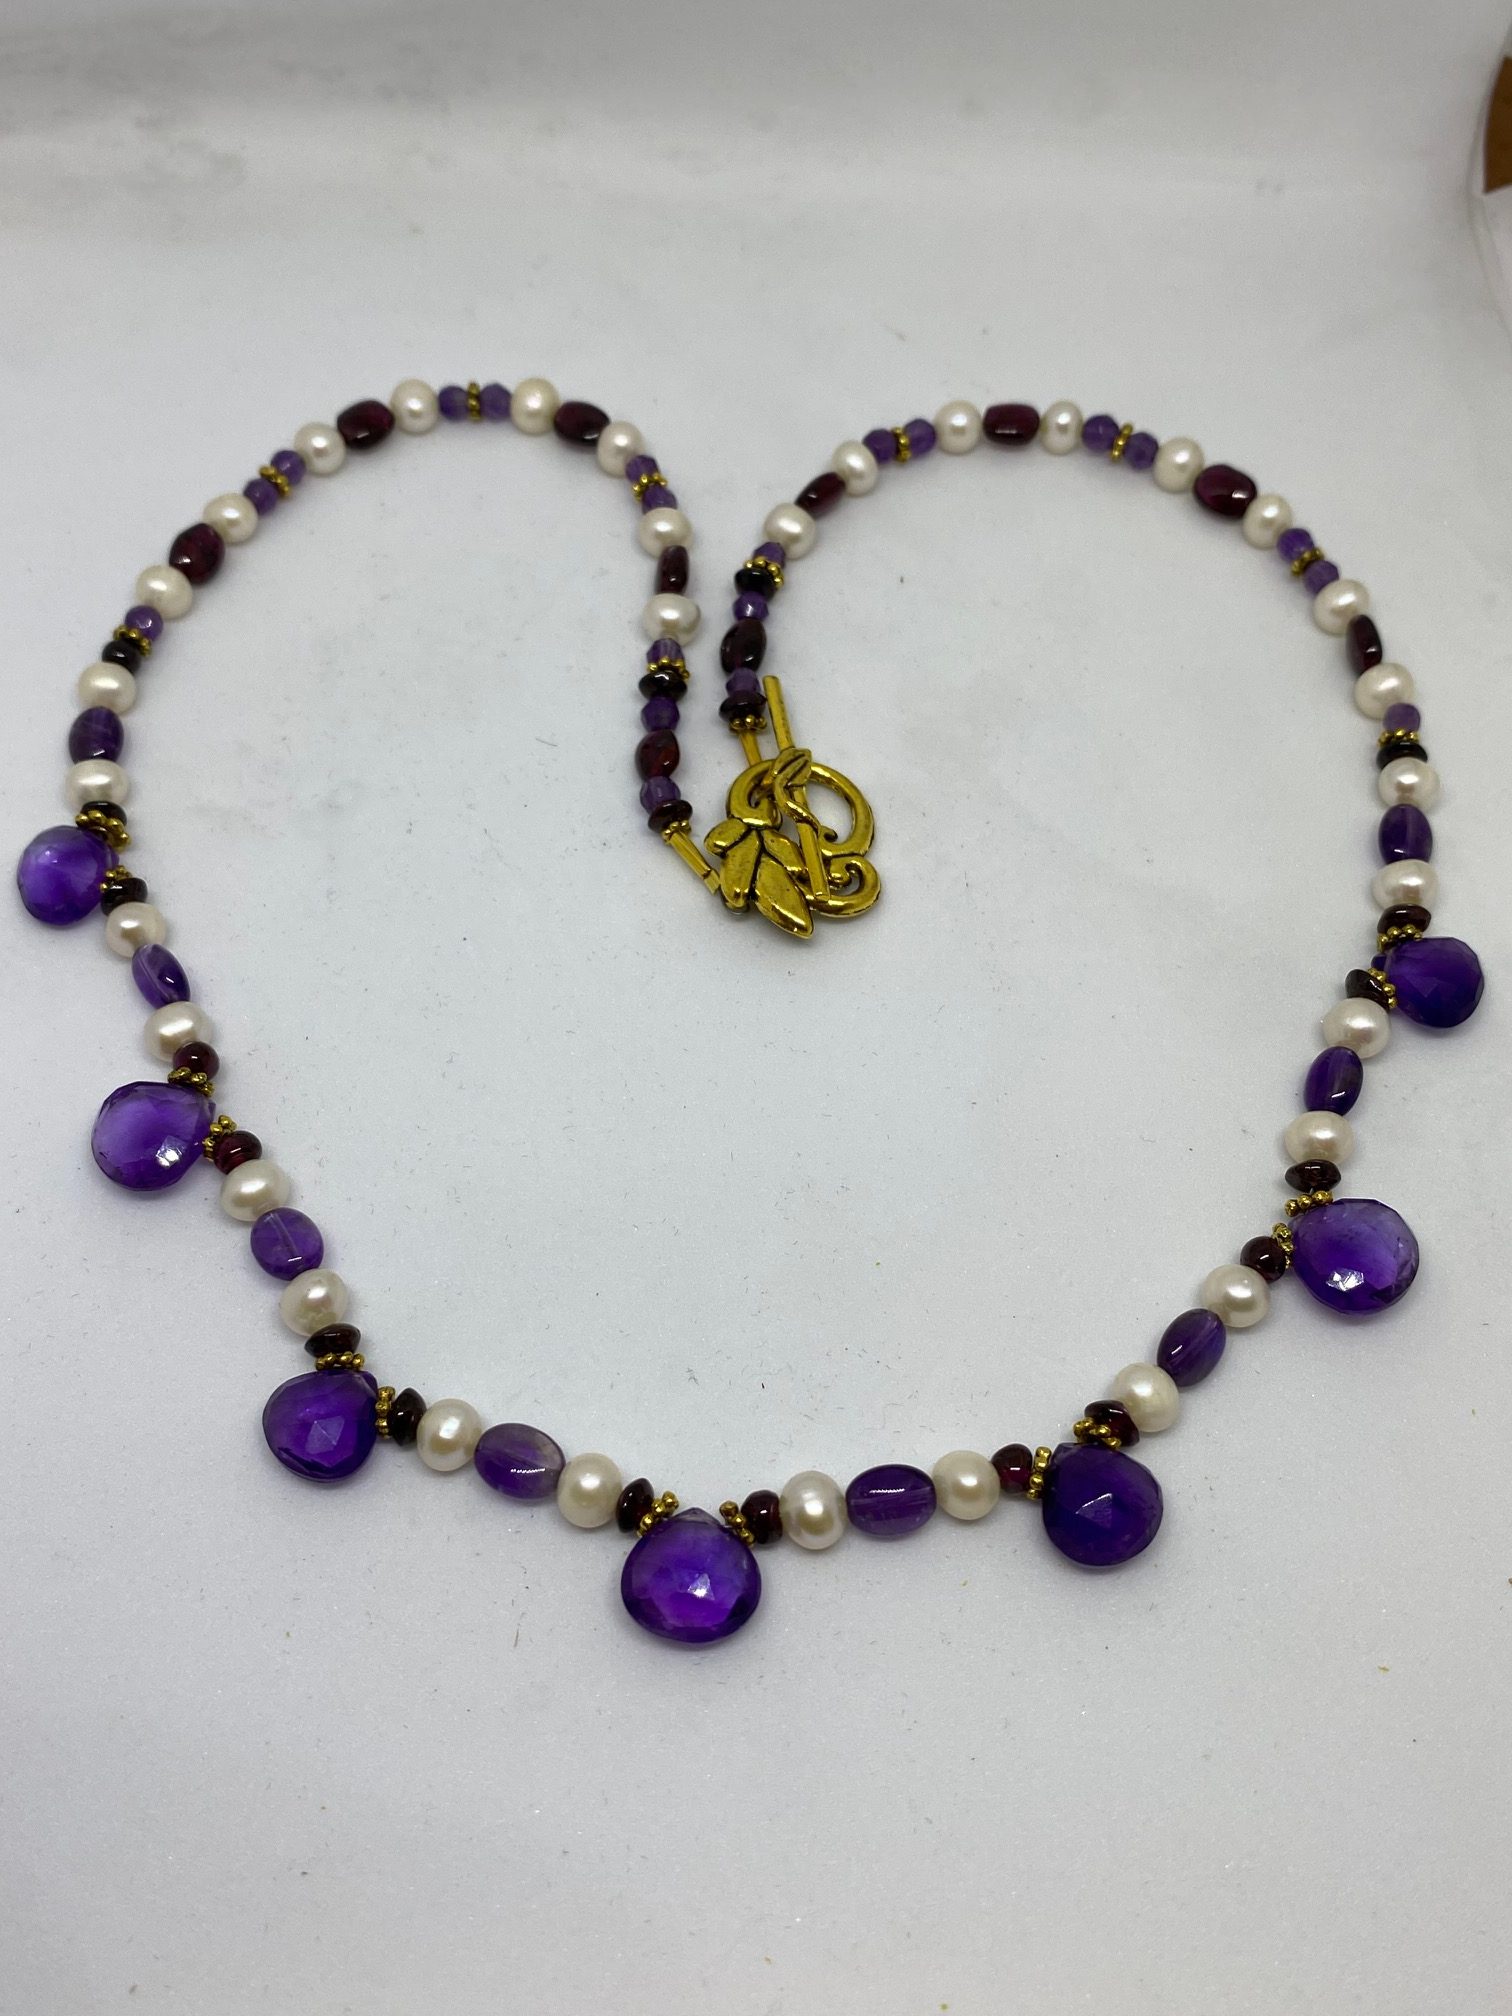 Amethyst and Pearl Necklace This necklace supports Focus, Intuition, and Integrity.